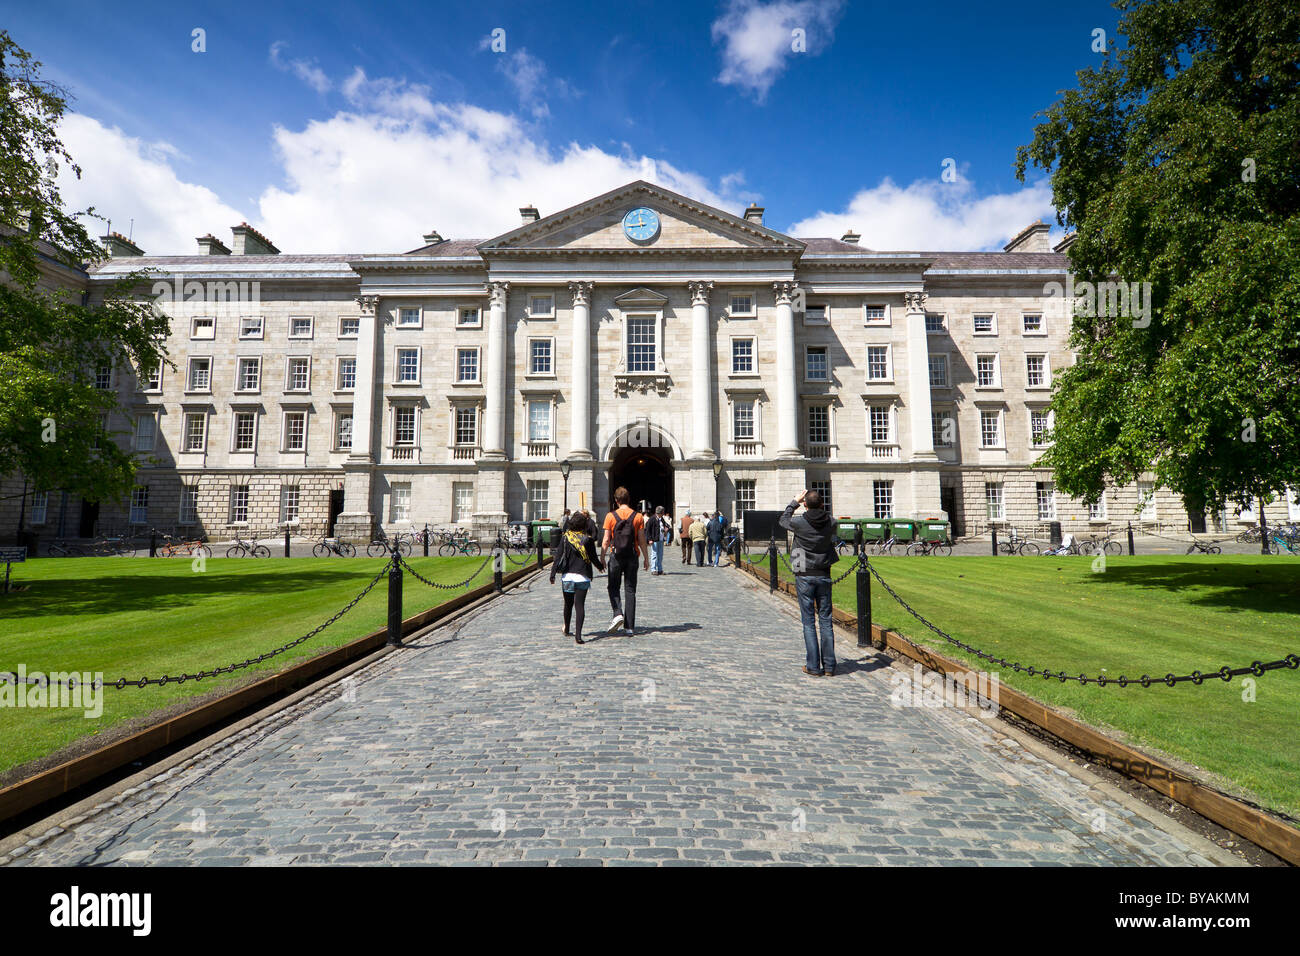 Trinity College, Dublin. All trademarks and faces have been cloned out. Stock Photo